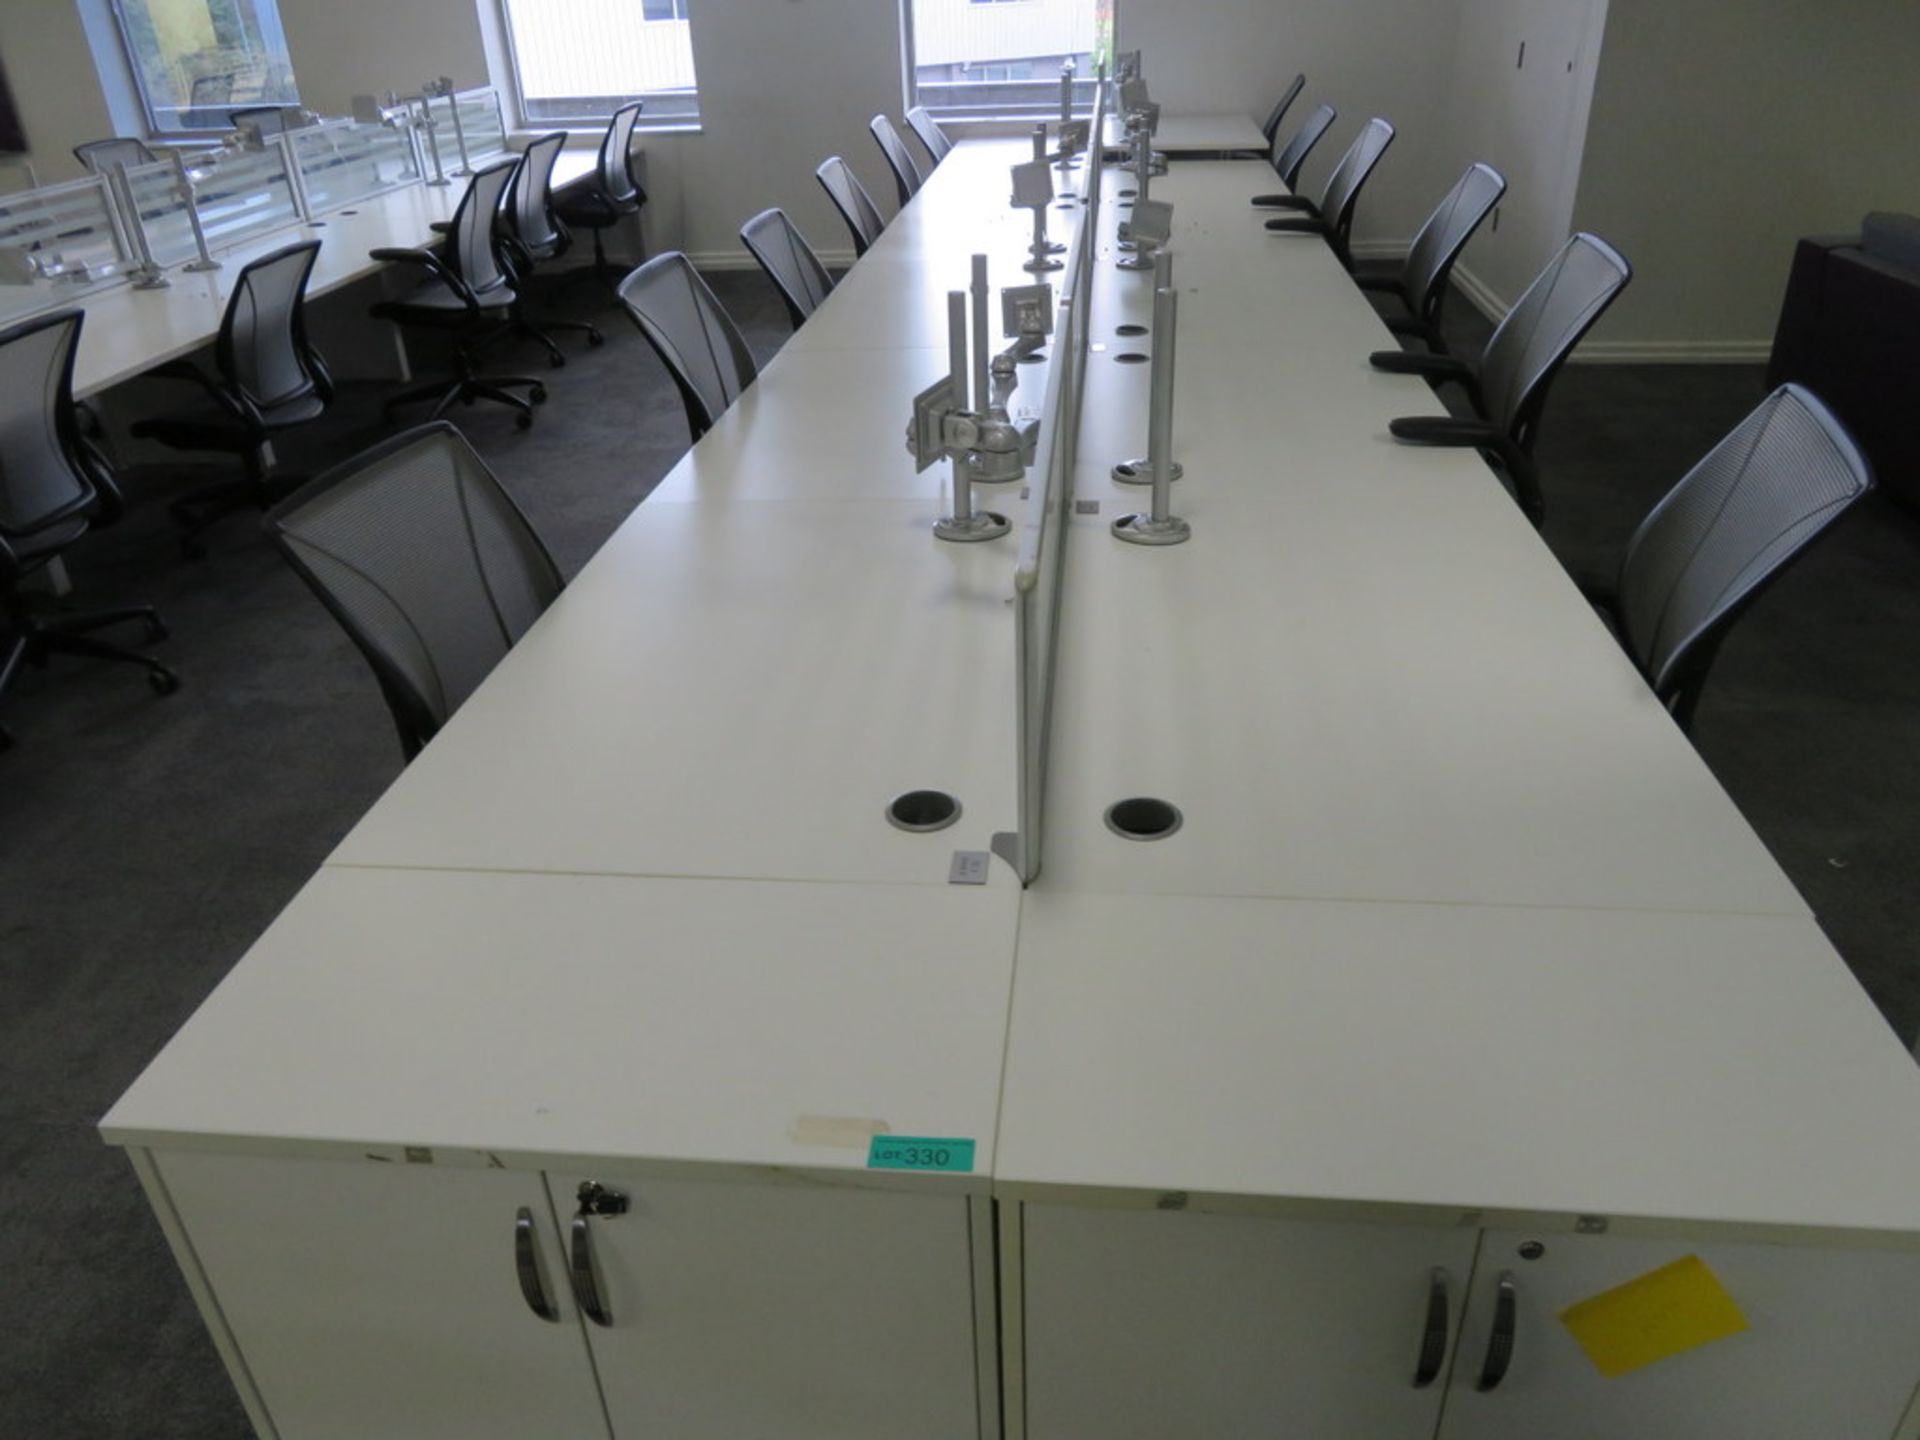 12 Person Desk Arrangement With Dividers, Monitor Arms & Storage Cupboards. Chairs Are Not Included. - Image 2 of 4